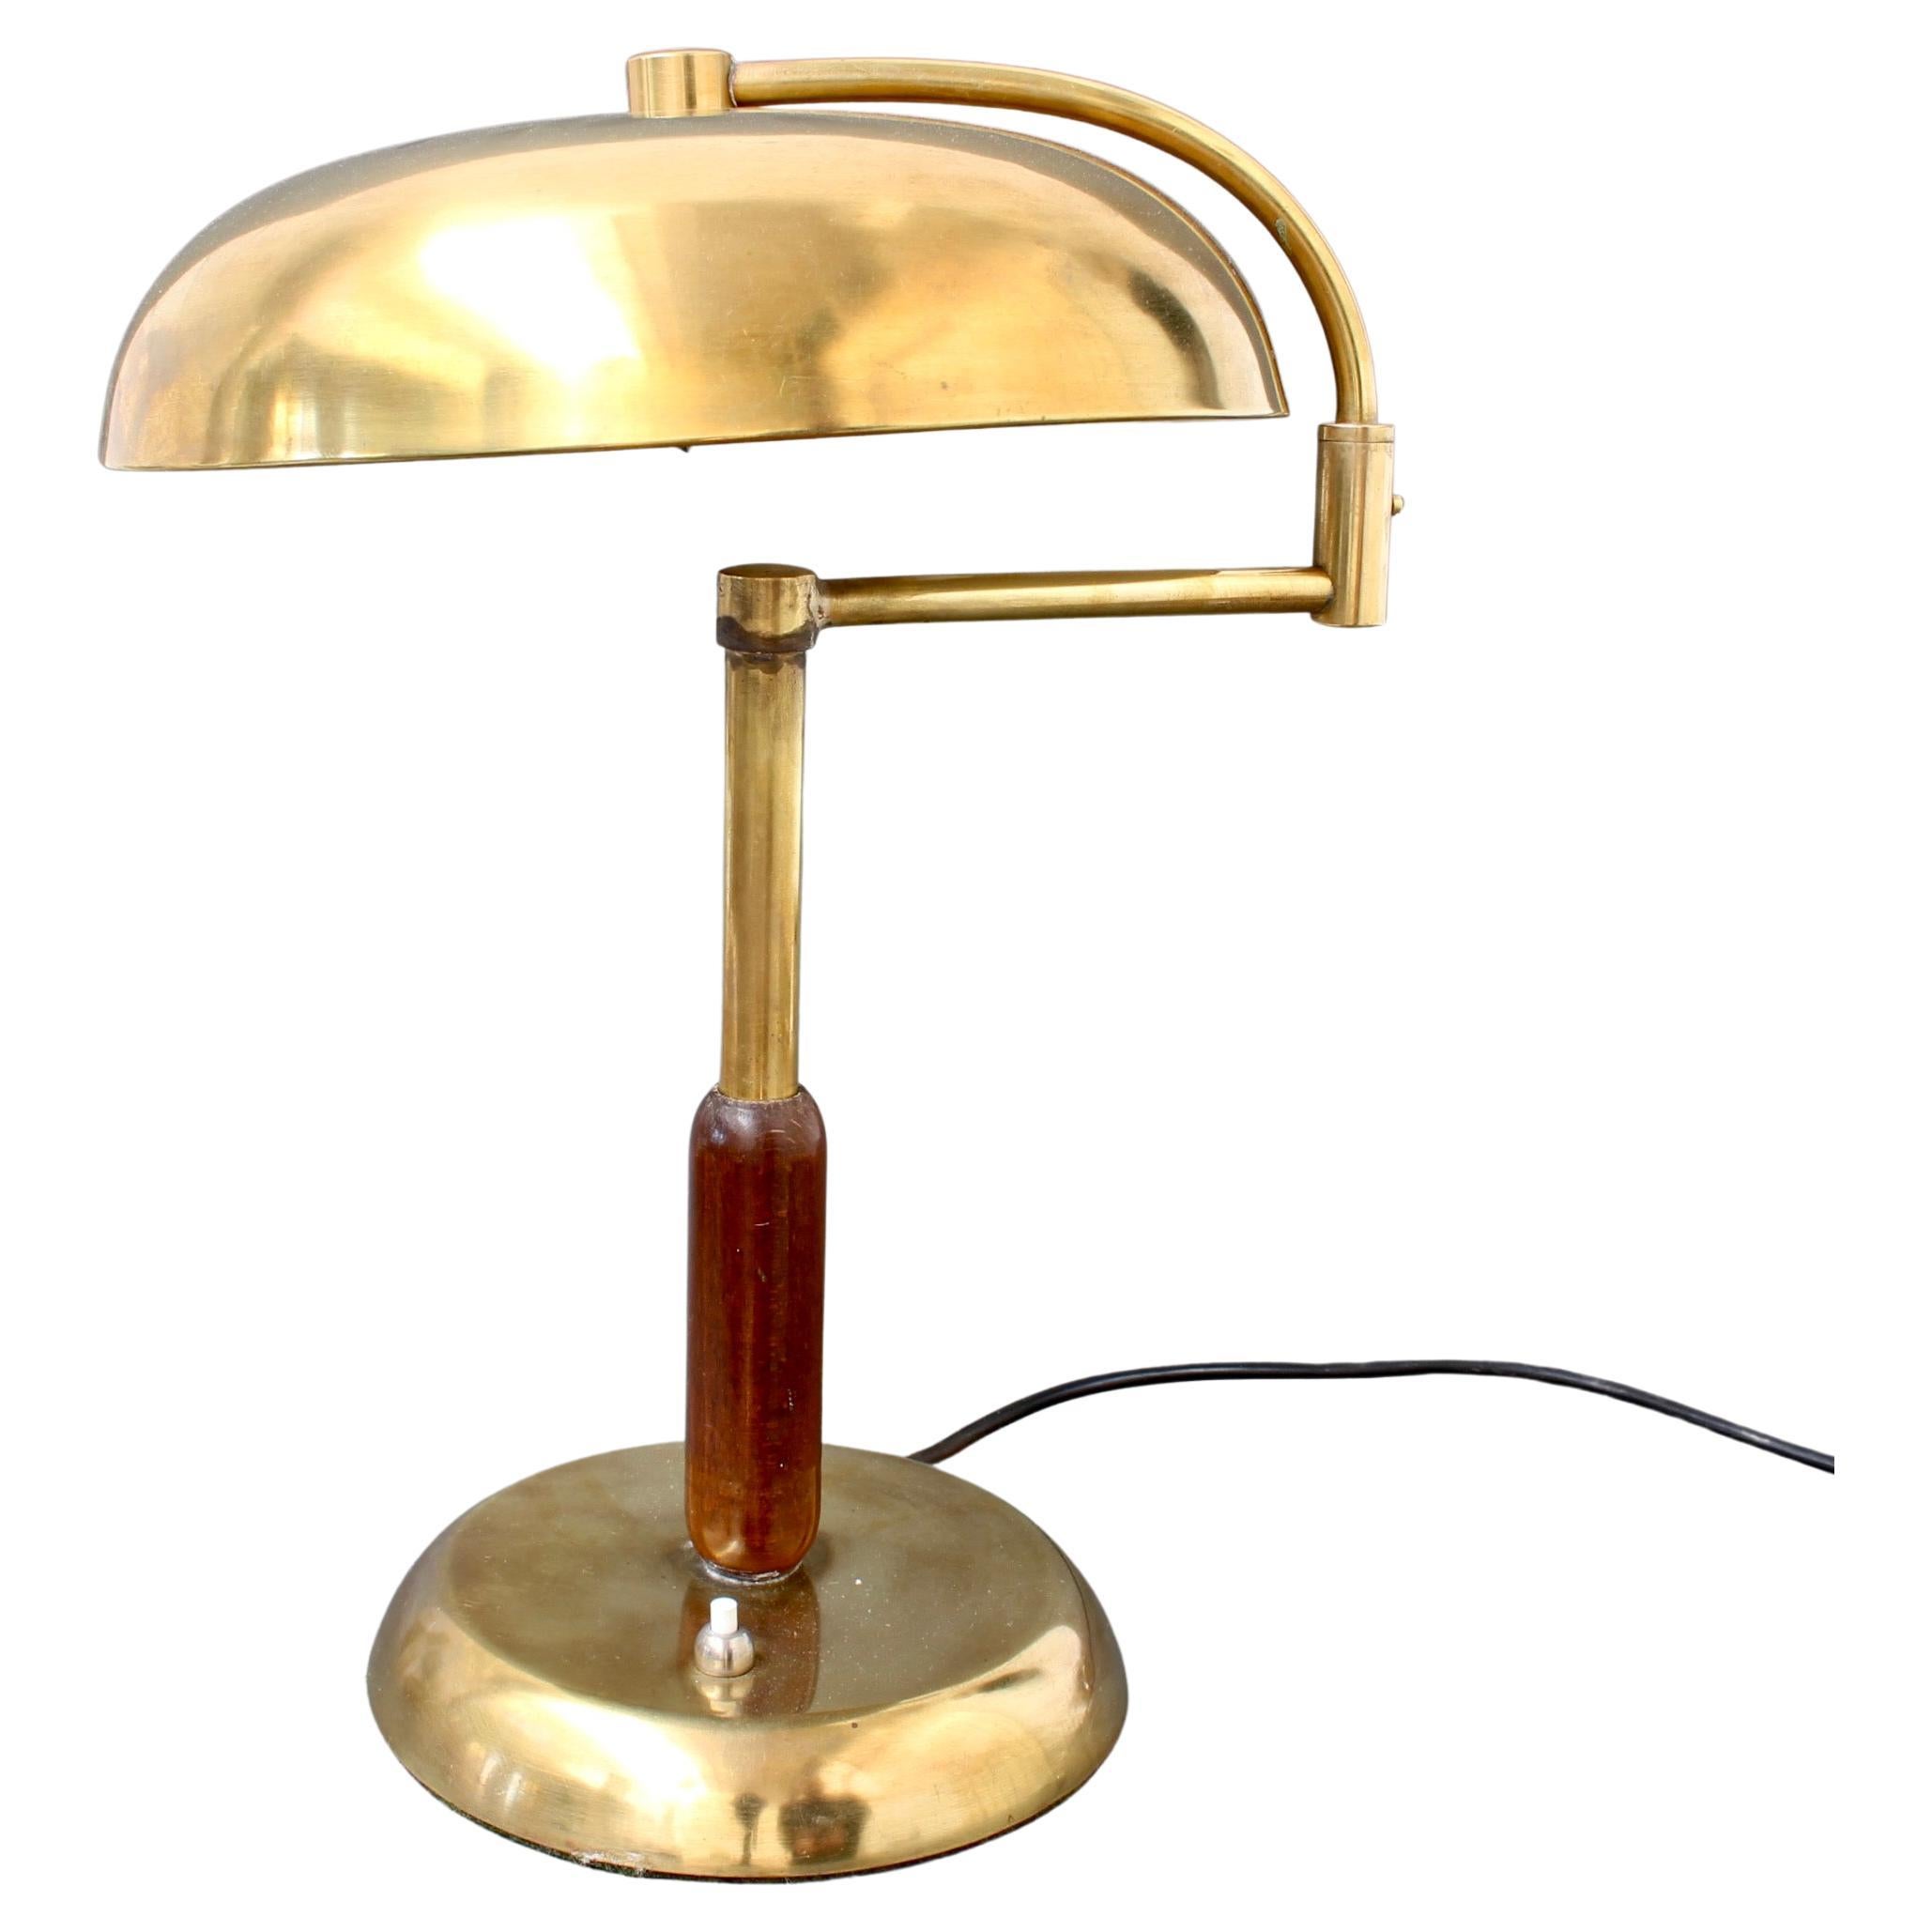 Italian Mid-Century Brass Table Lamp with Swivel Arm, circa 1950s For Sale